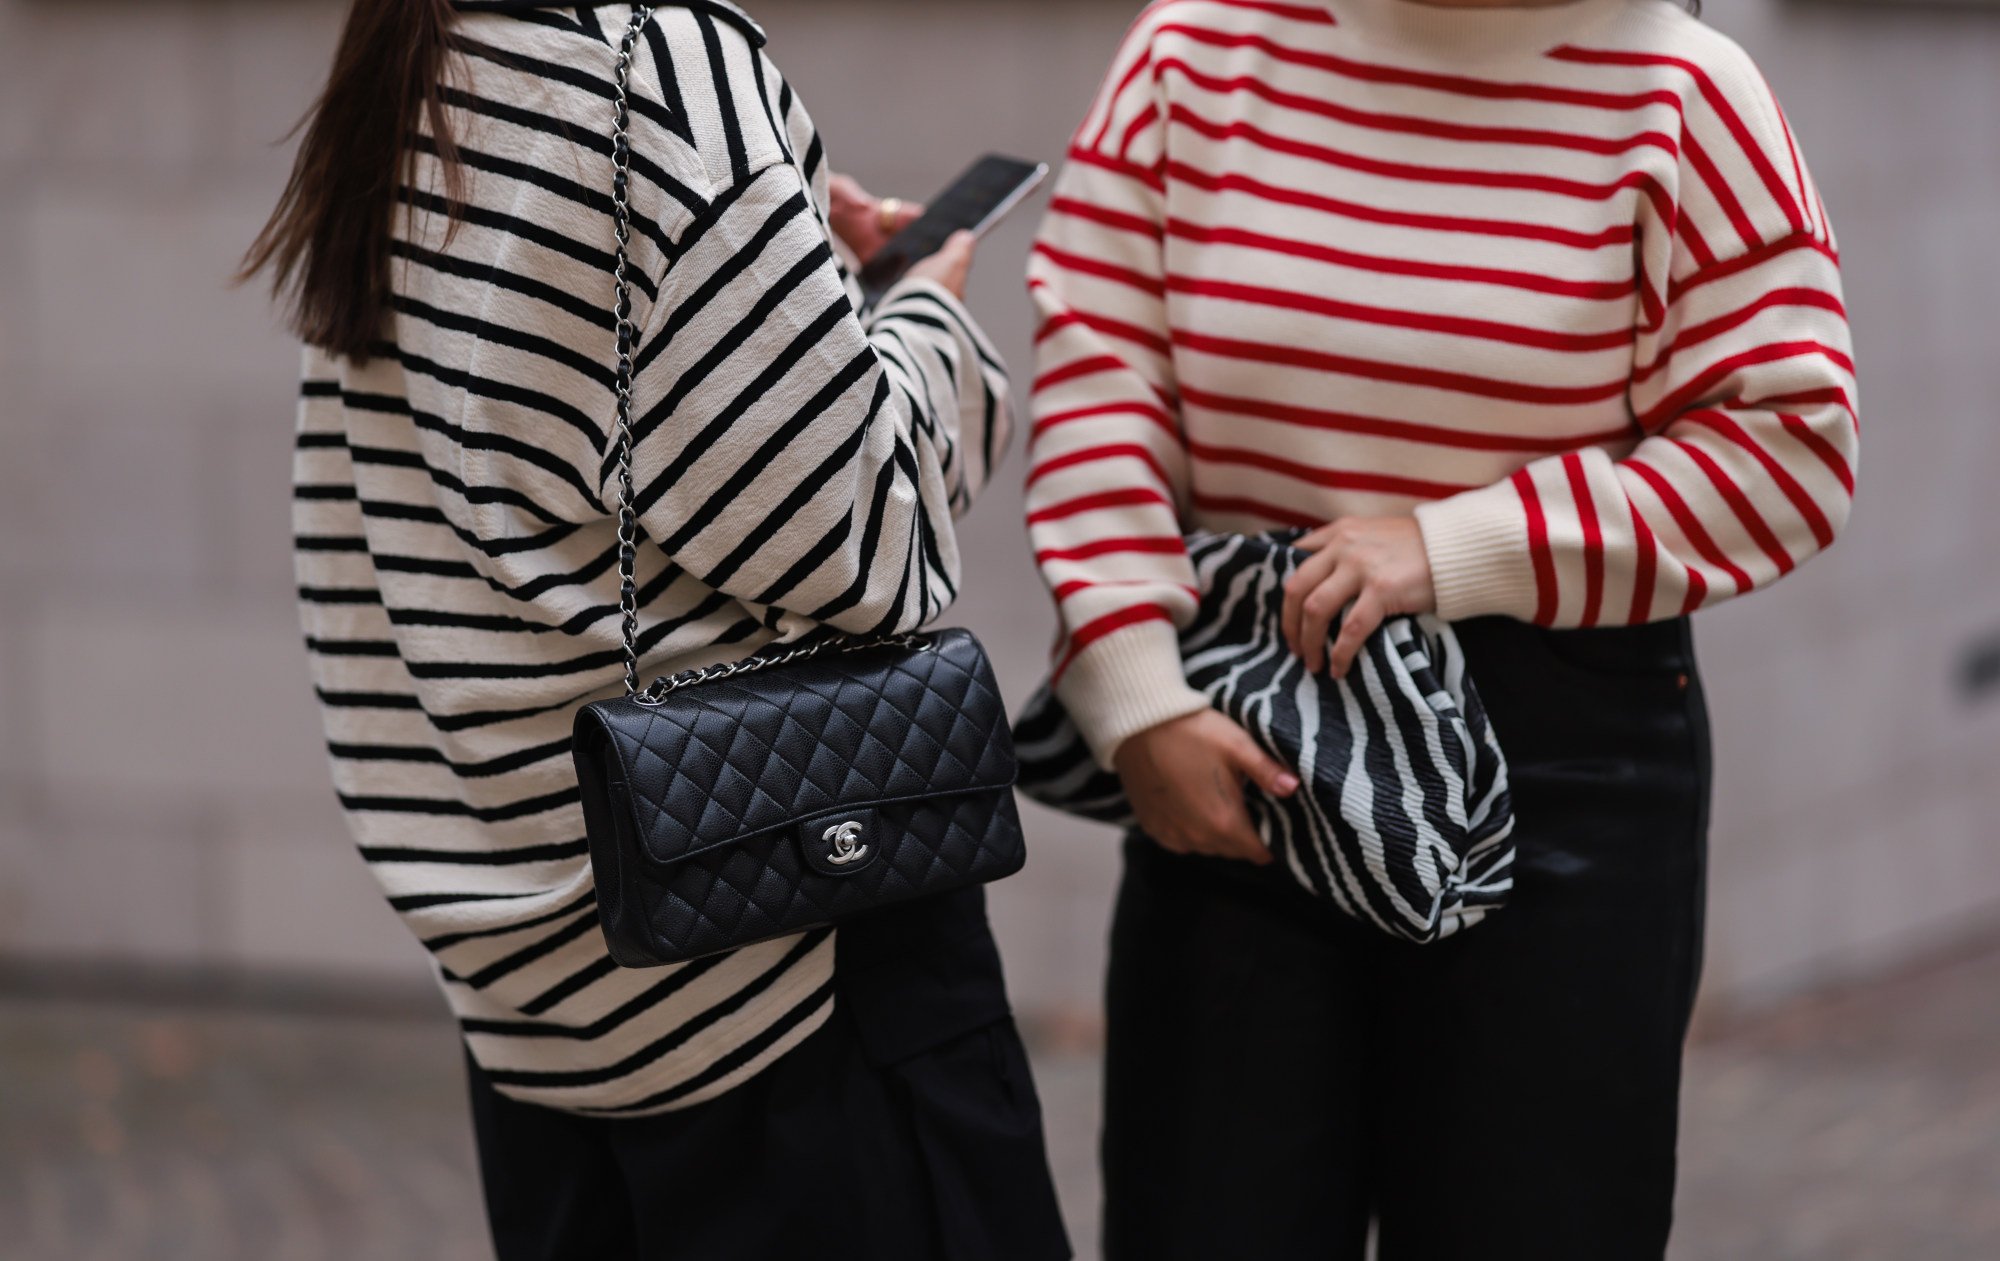 4 Ways You Could Make Money from Your Old Luxury Handbags